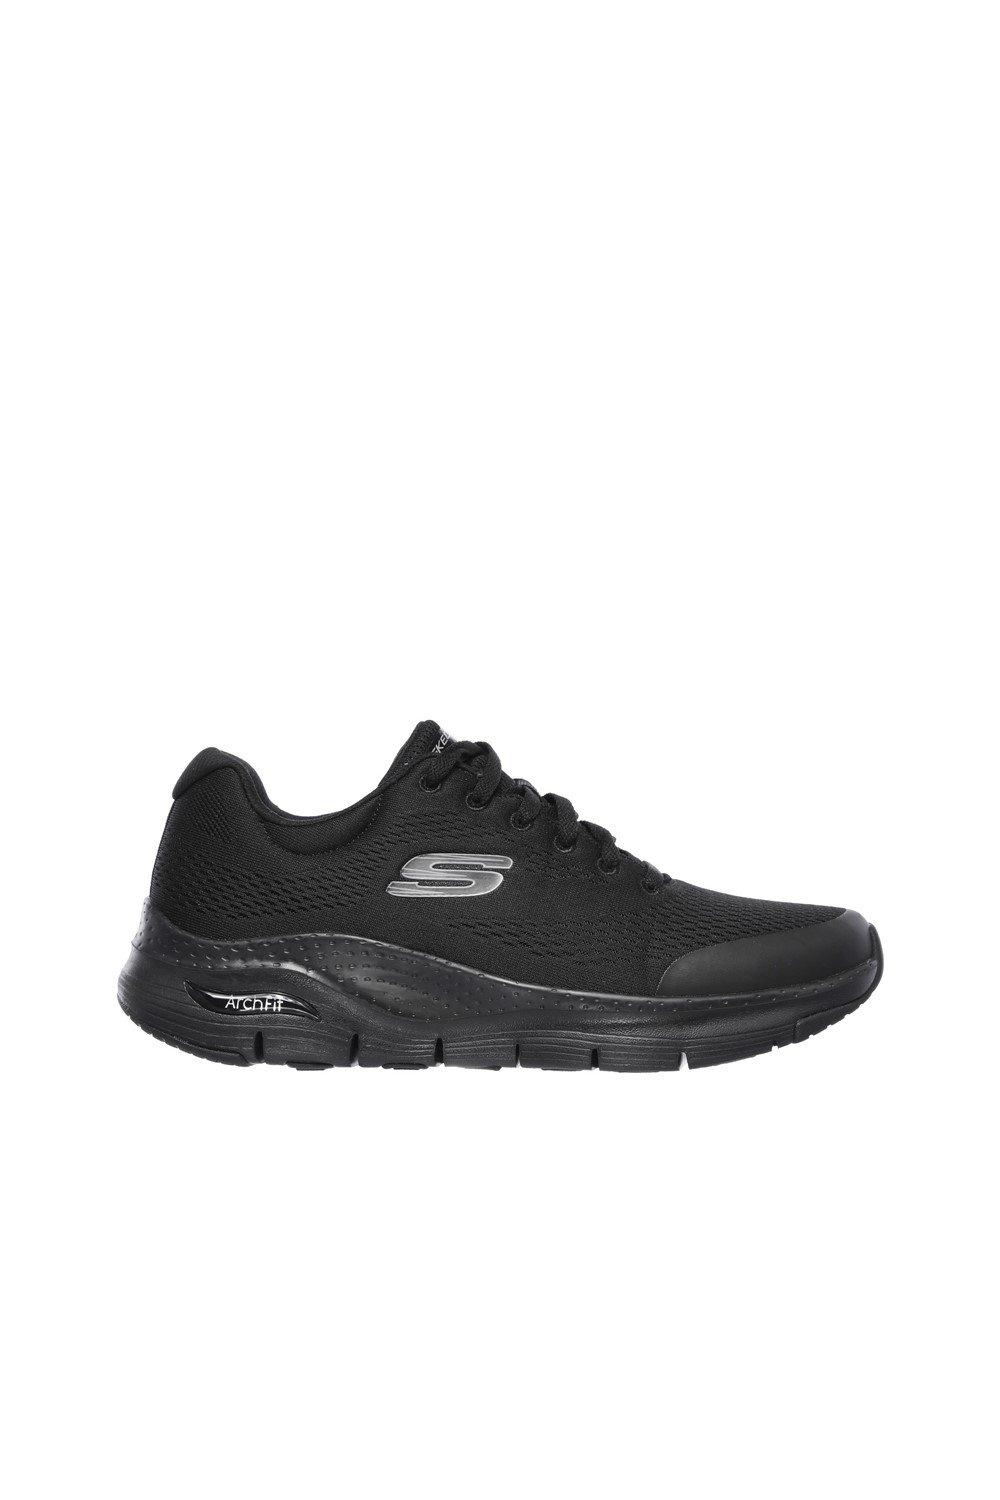 Ved daggry syre Frank Worthley Skechers at Debenhams